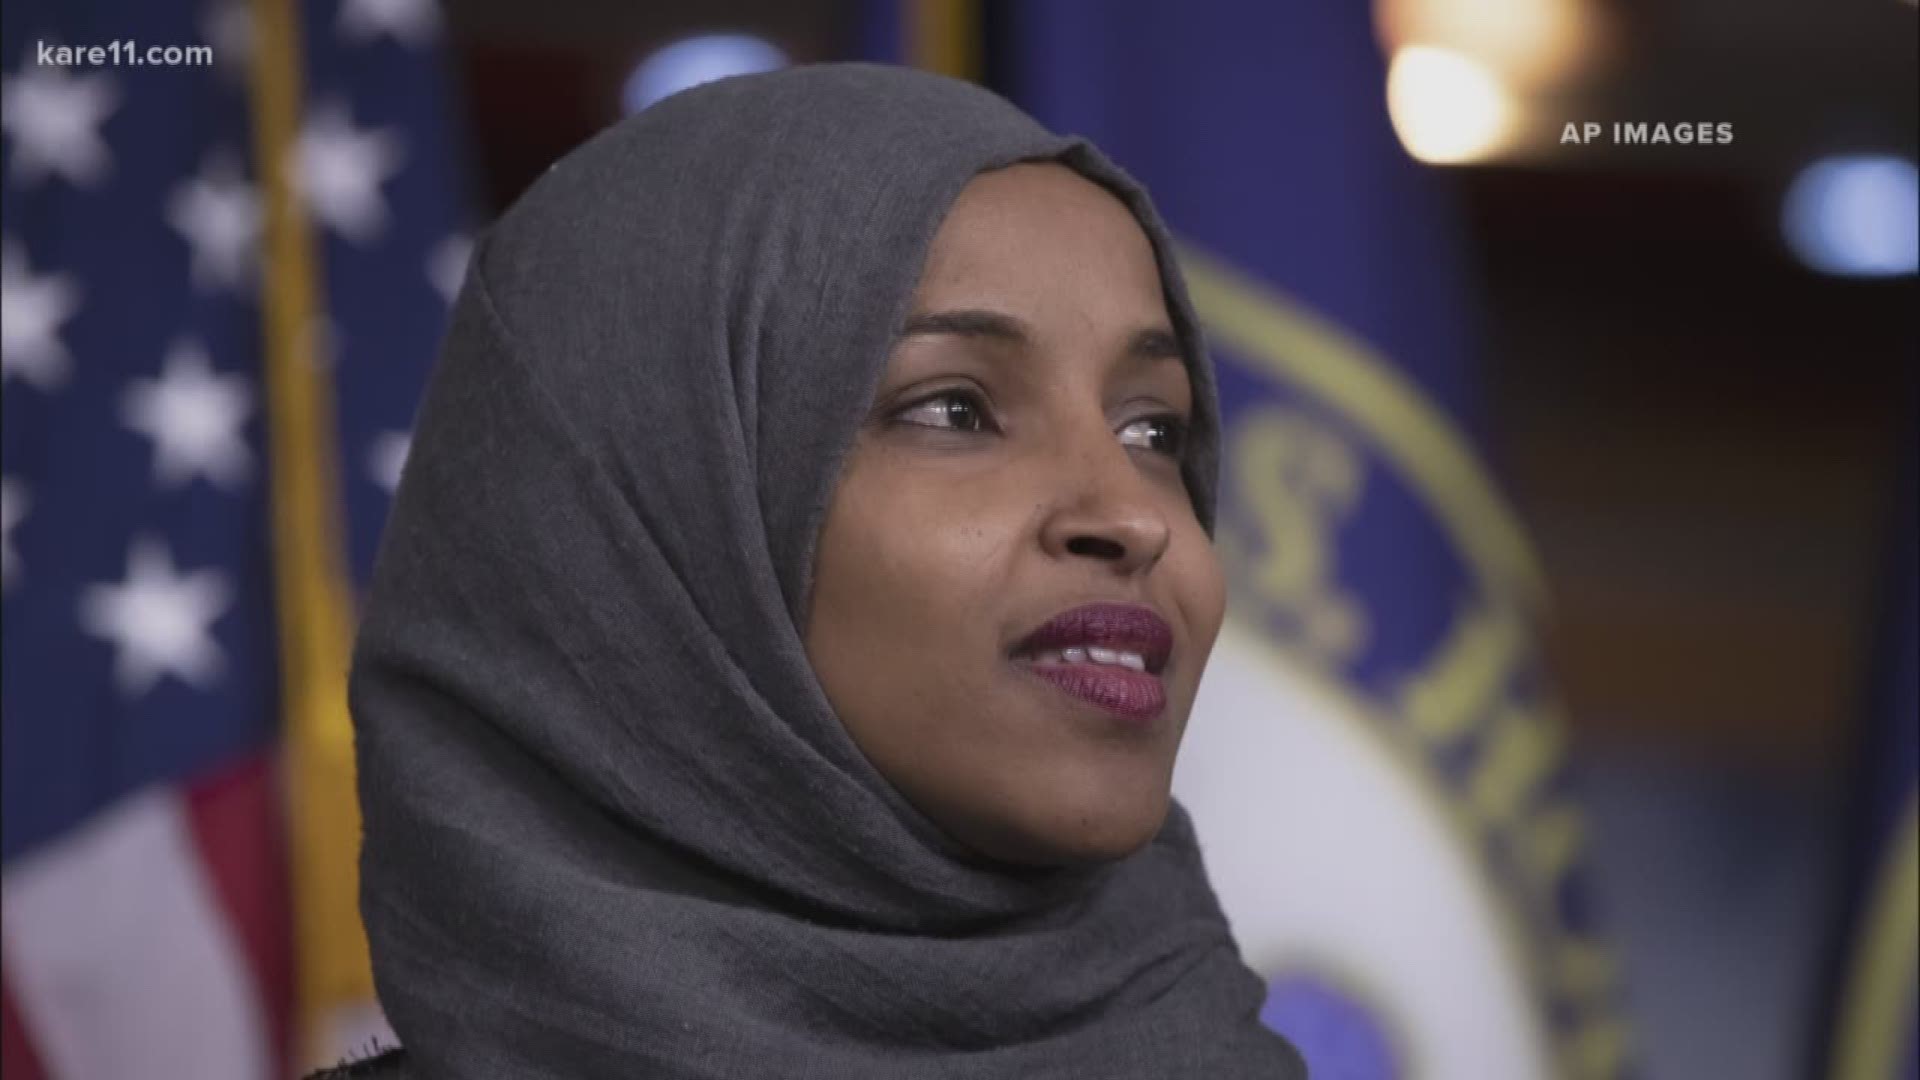 A Republican state lawmaker is pressing for a Congressional ethics investigation of Rep. llhan Omar over her tax returns and marriage history. The lawmaker, Rep. Steve Drazkowski of Mazeppa, is the same legislator who filed a state campaign finance complaint against Omar.